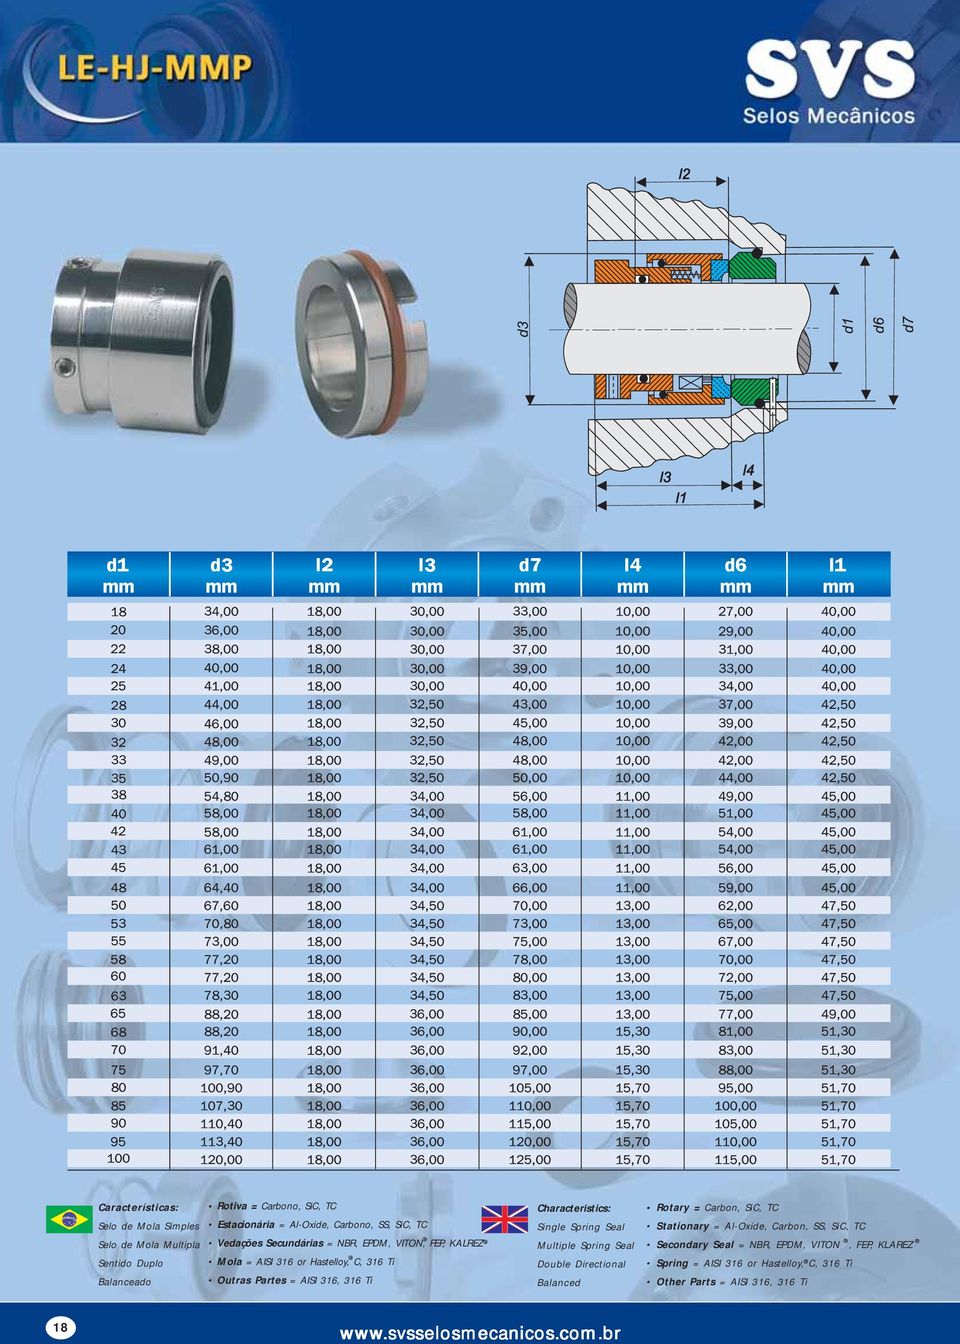 Partes = AISI 316, 316 Ti Multiple Spring Seal Double Directional Balanced otary = Carbon, SiC, TC Stationary = Al-Oxide,